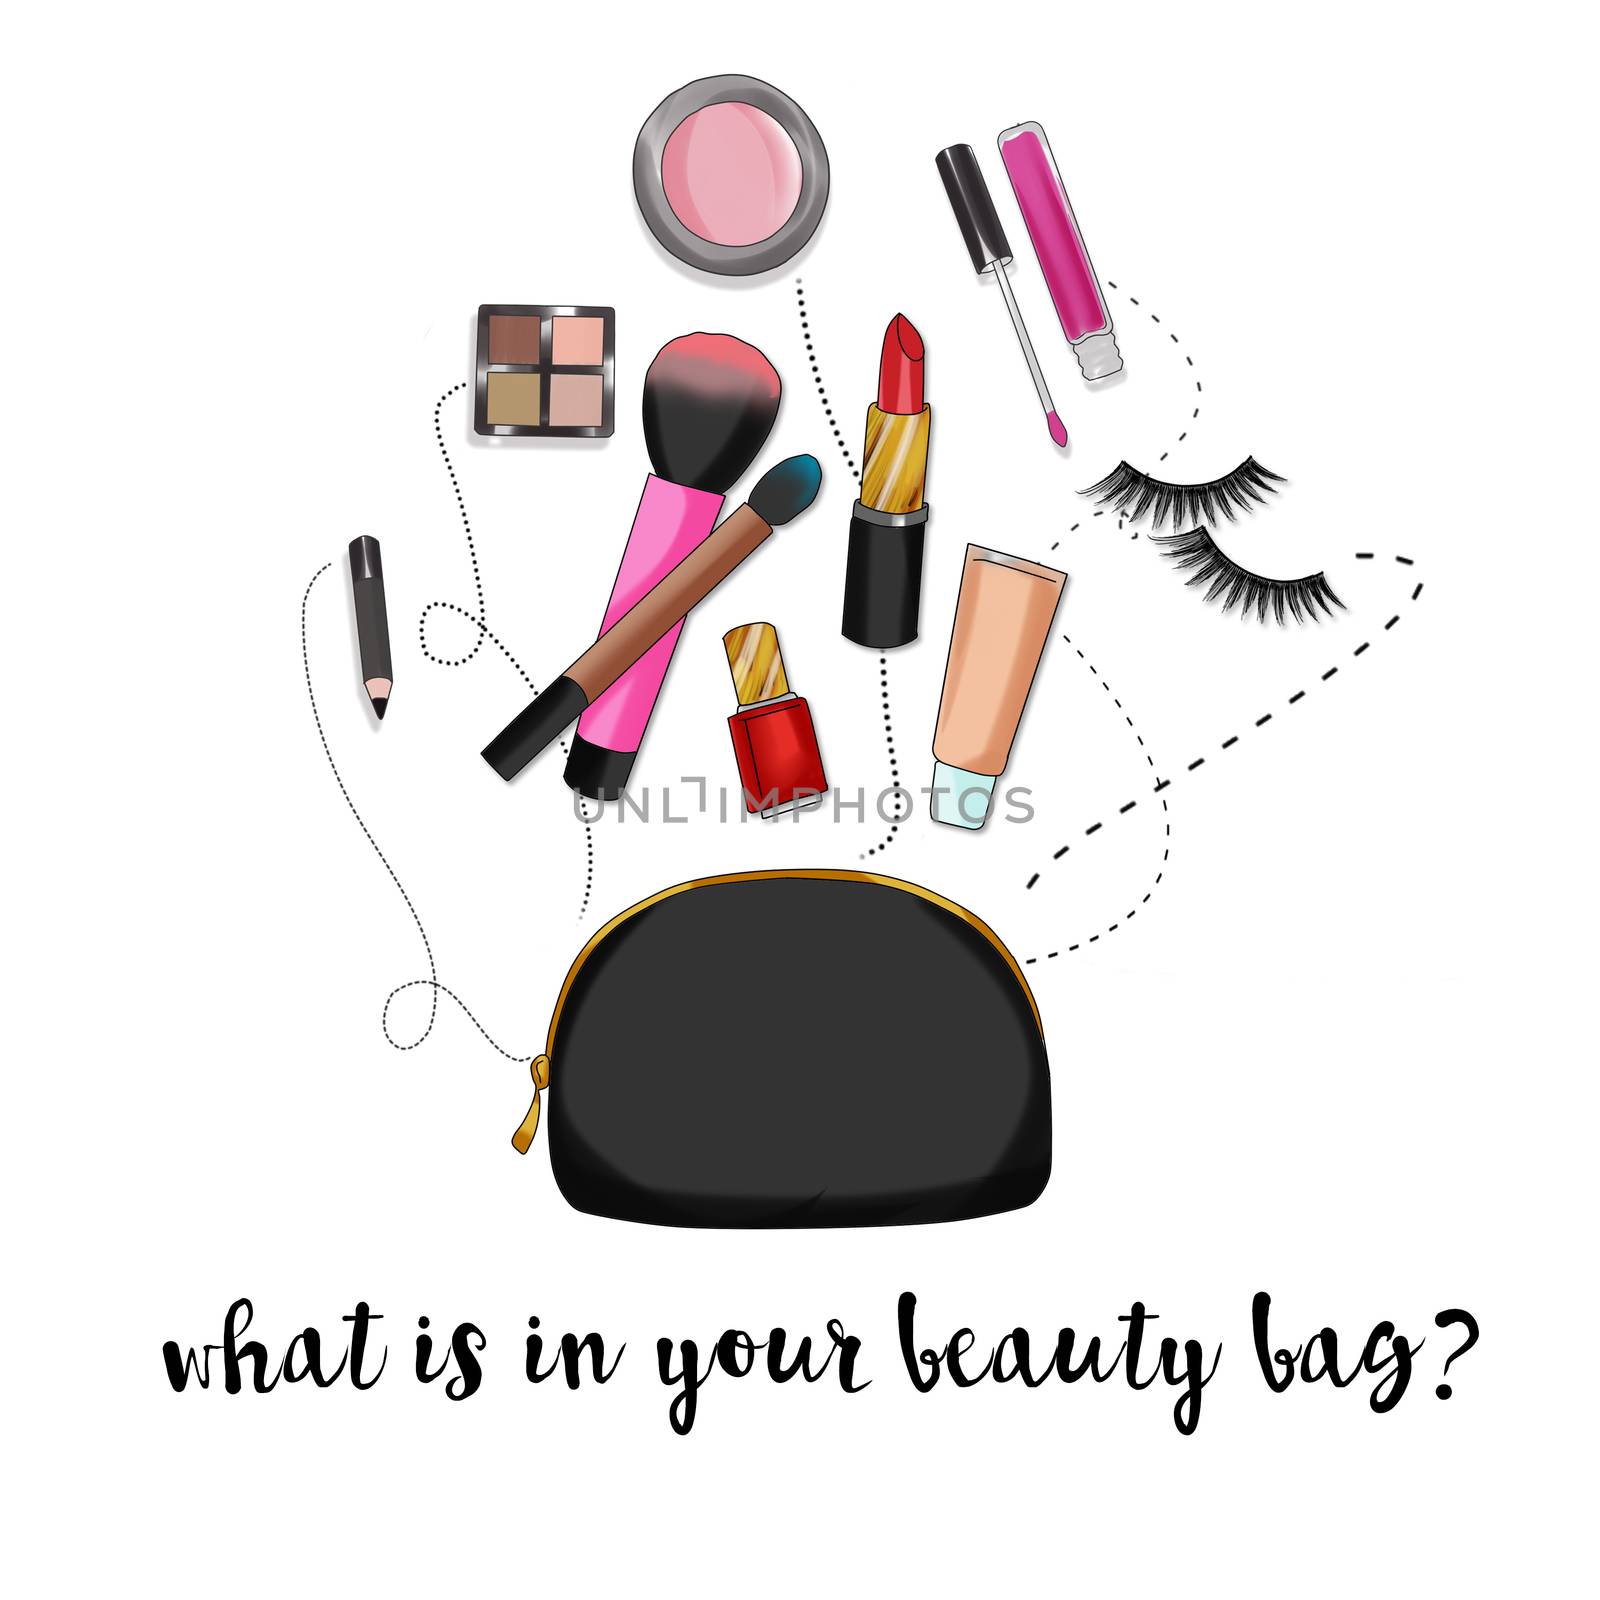 Fashion Illustration background - Beauty bag with make up and cosmetics by GGillustrations